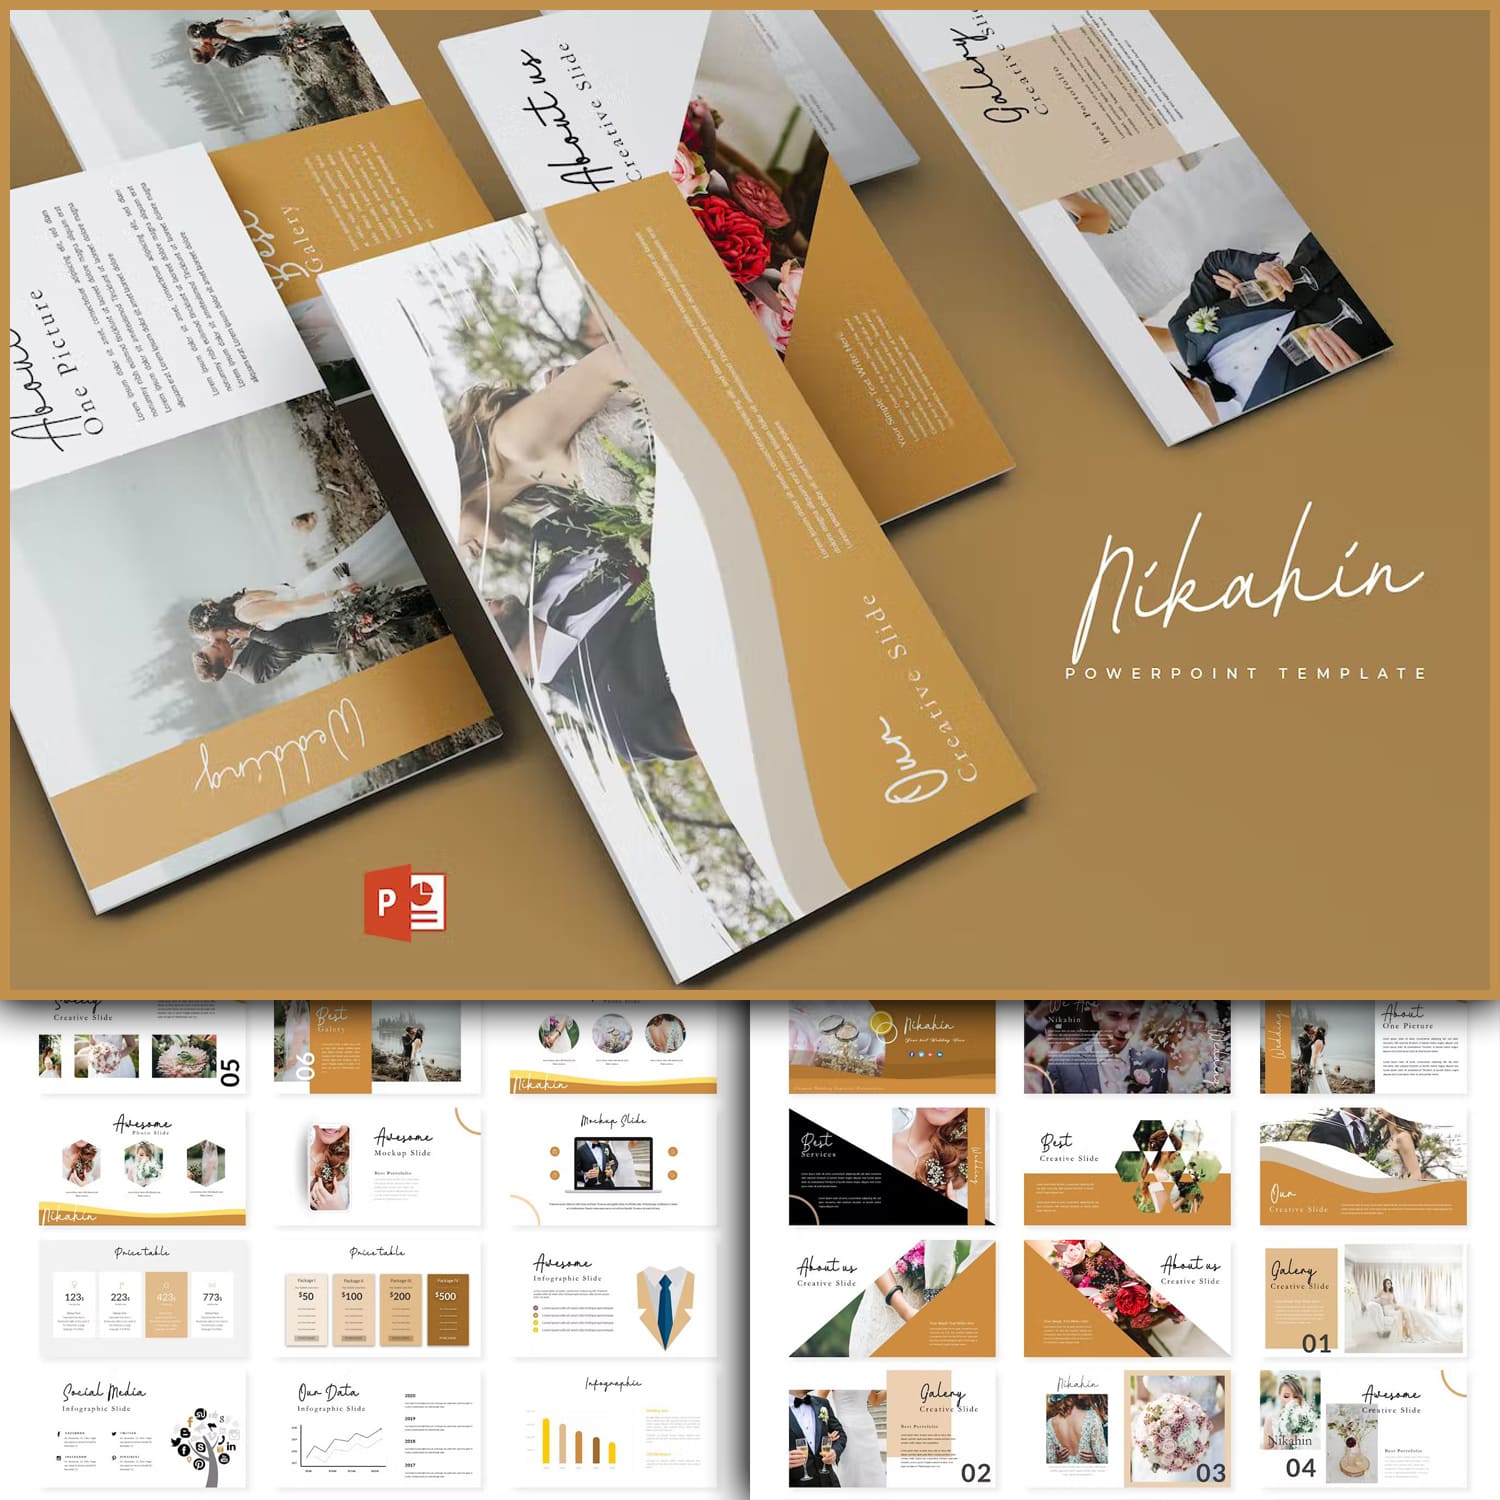 Collection of images of beautiful presentation template slides in brown and white colors.